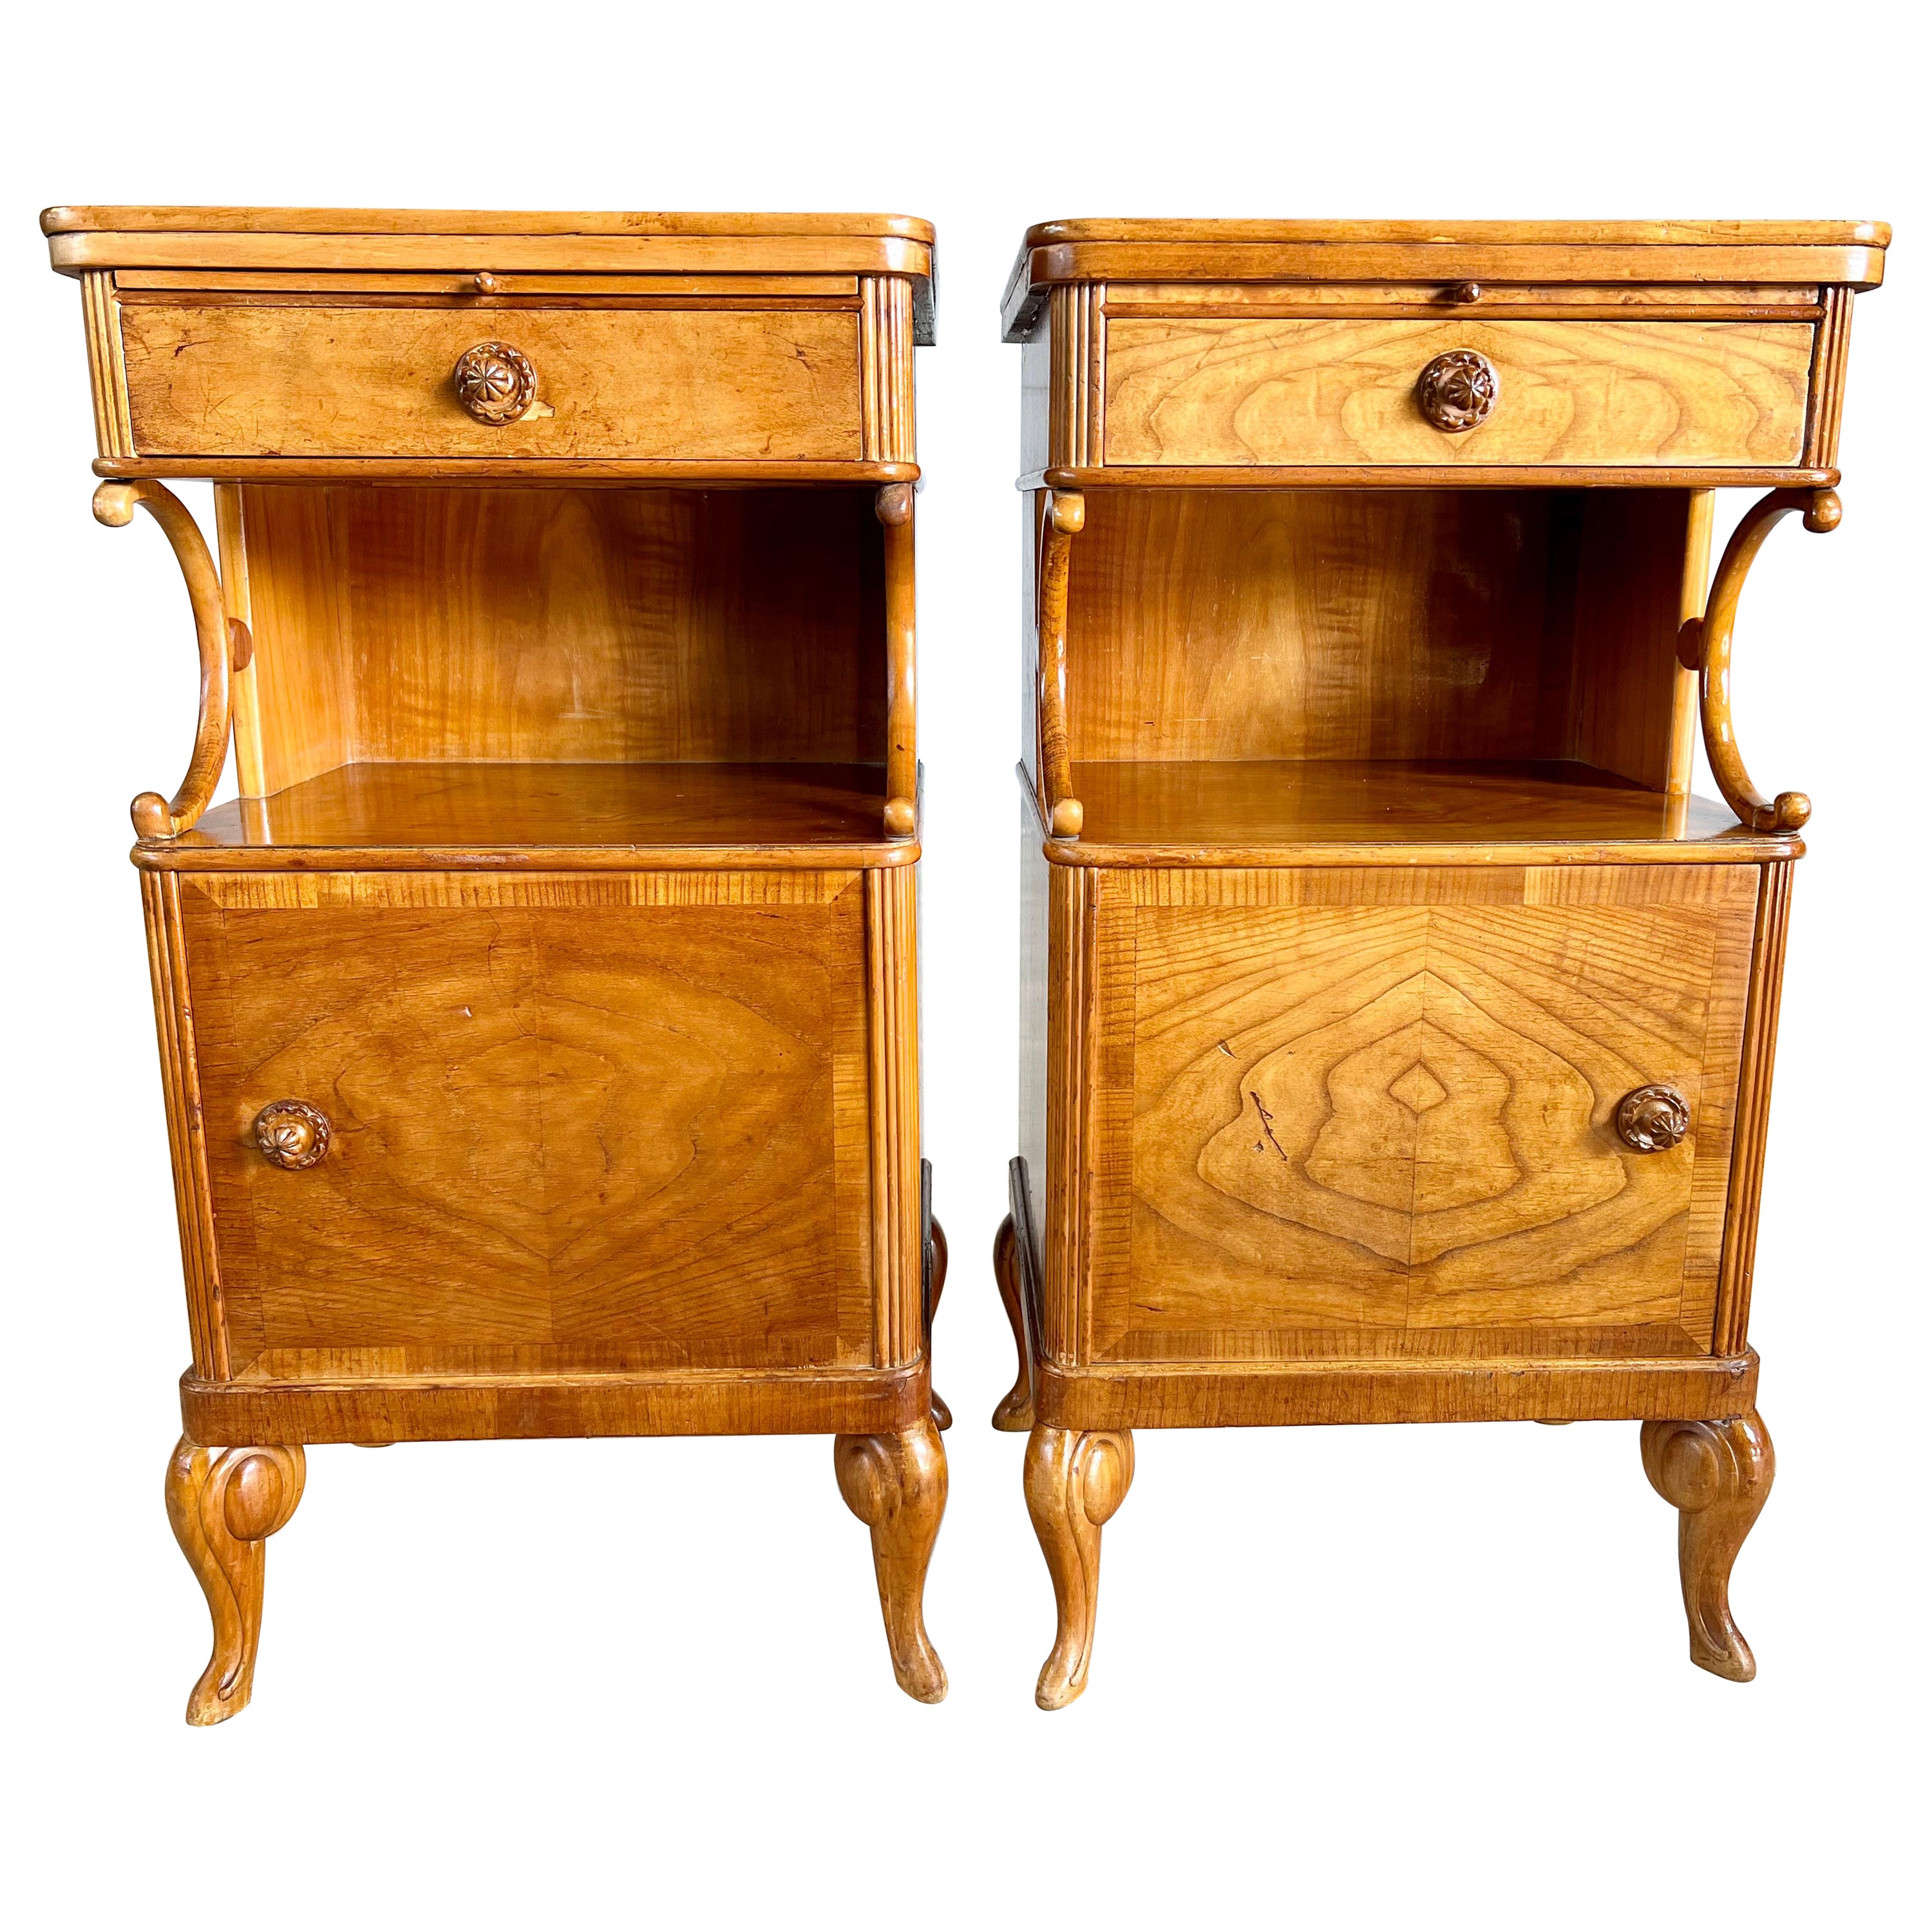 Pair of Vintage Queen Anne Style Bedside Cabinets or Nighstands